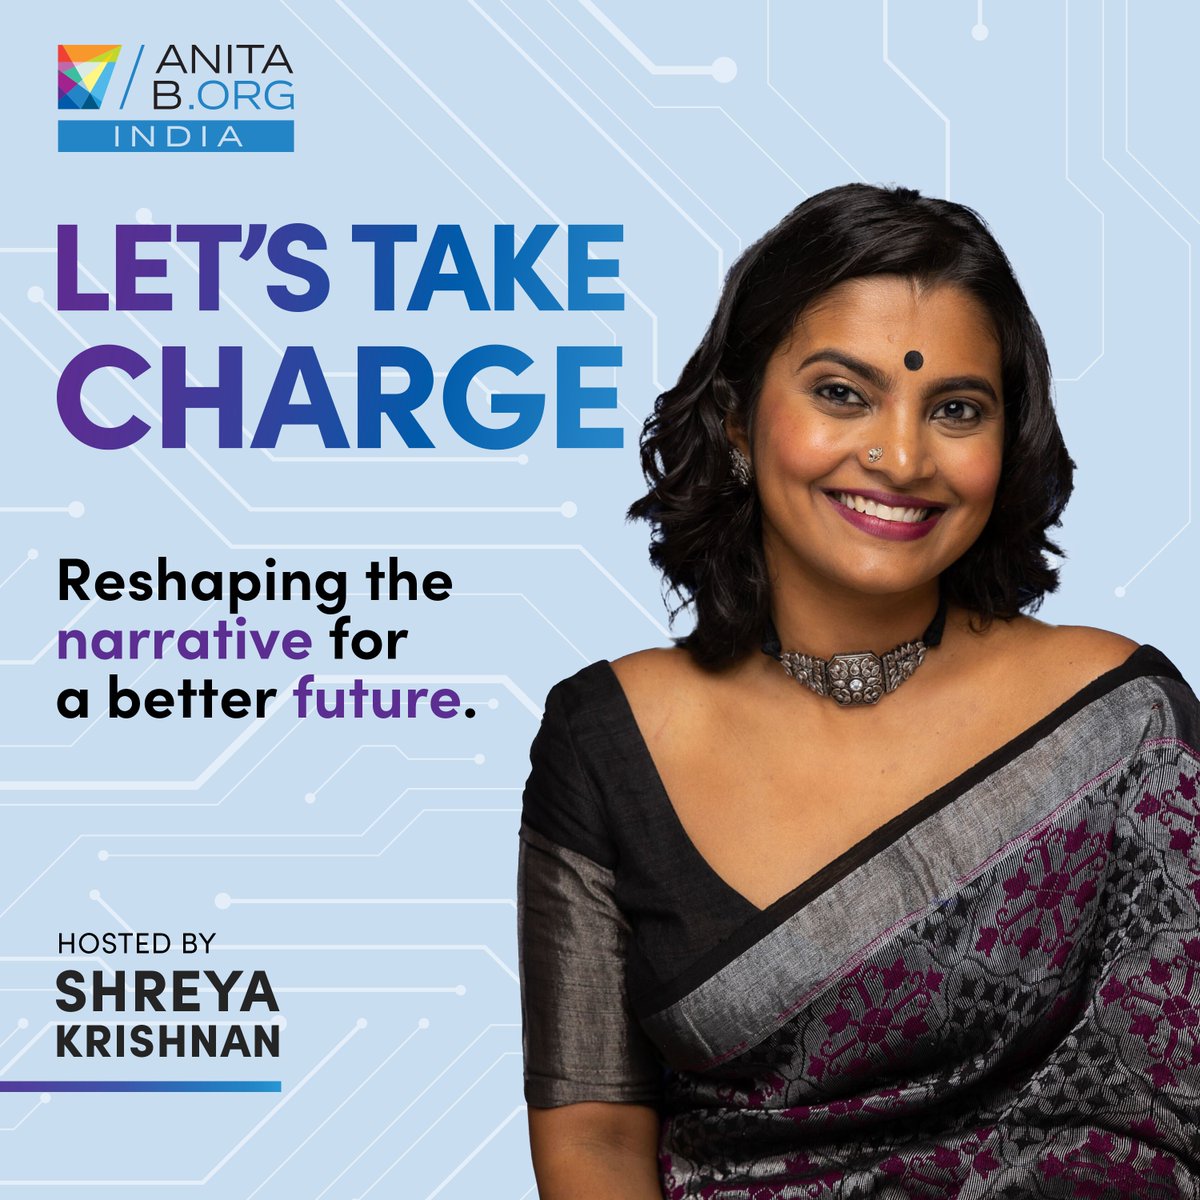 #launchalert Unveiling AnitaB.org's India podcast: Let’s Take Charge. Authentic Voices, Authentic Expression, hosted by Shreya Krishnan MD AnitaB.org India. Watch this space for more! #IdentityJourney #InclusiveTech #AuthenticLiving